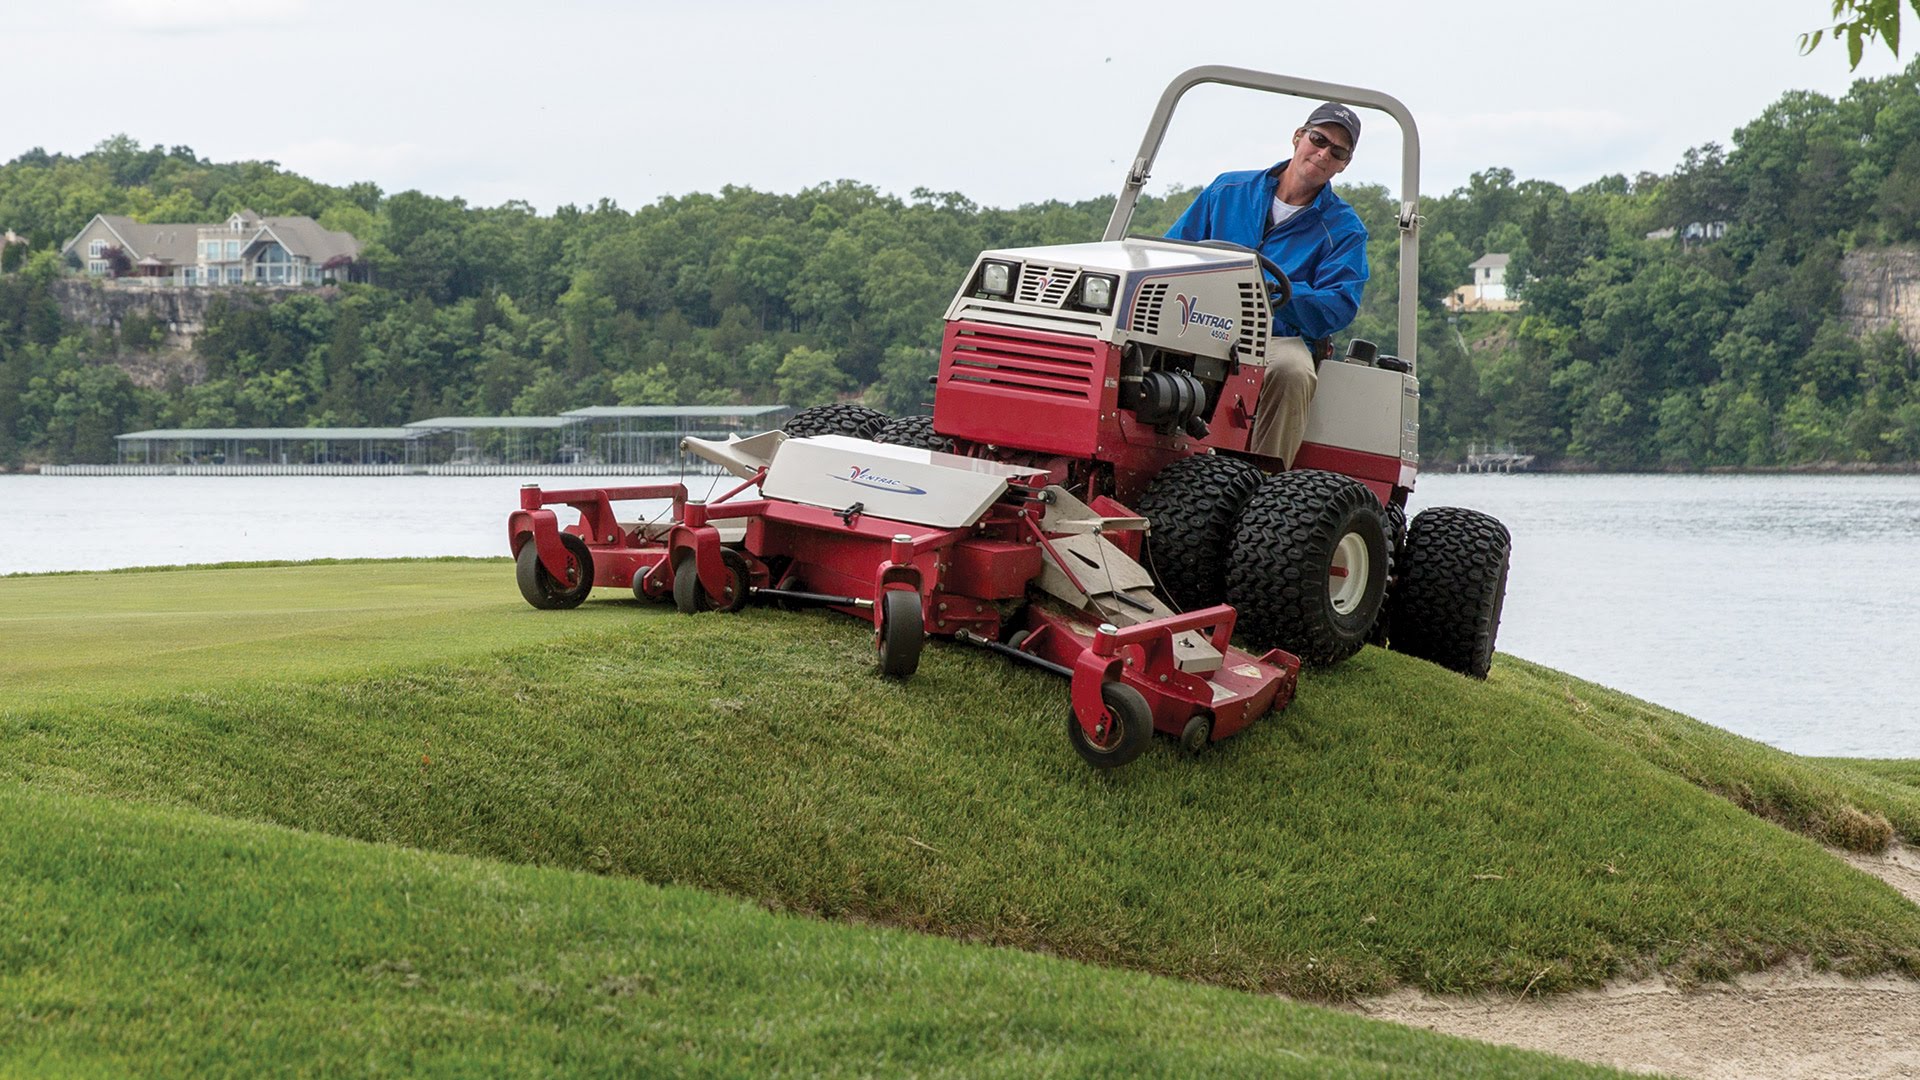 Elite Golf Course Upgrades to Better Mowing Equipment